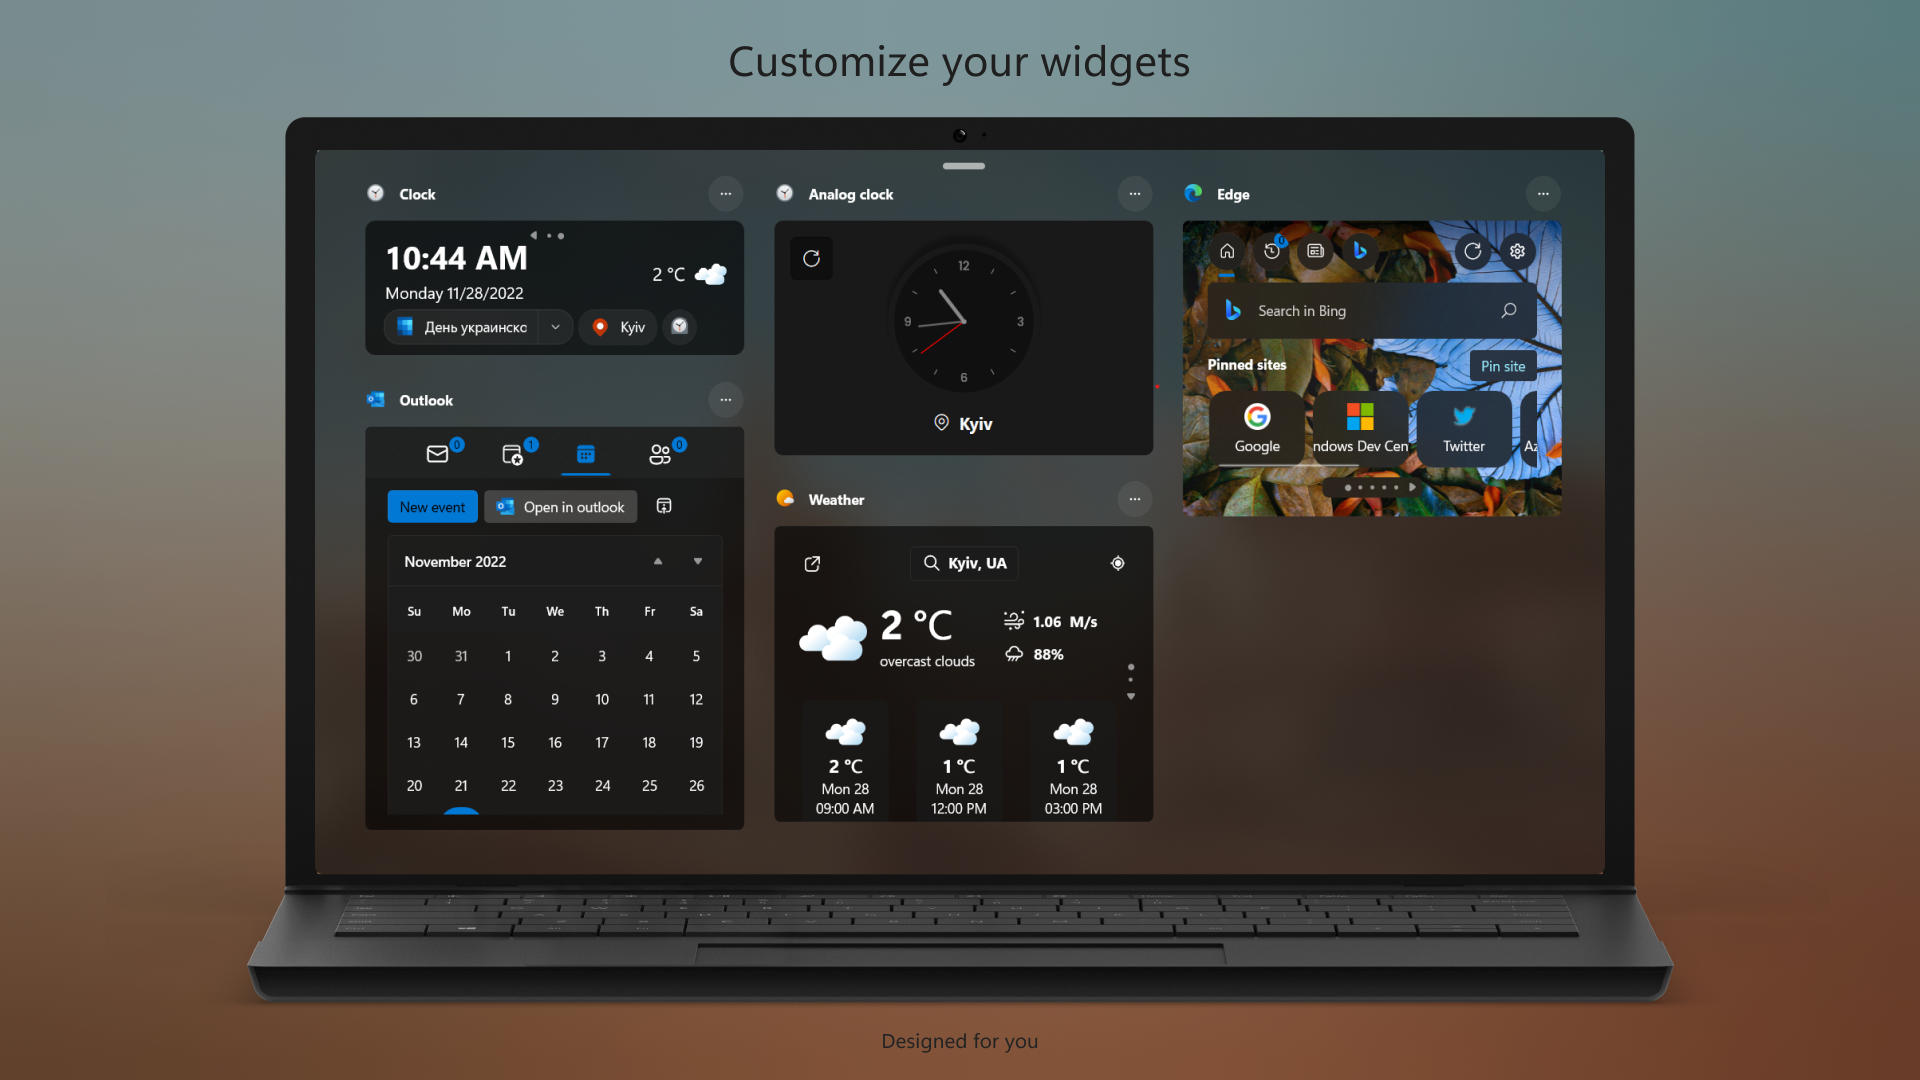 Power Widgets - introducing new widgets for you